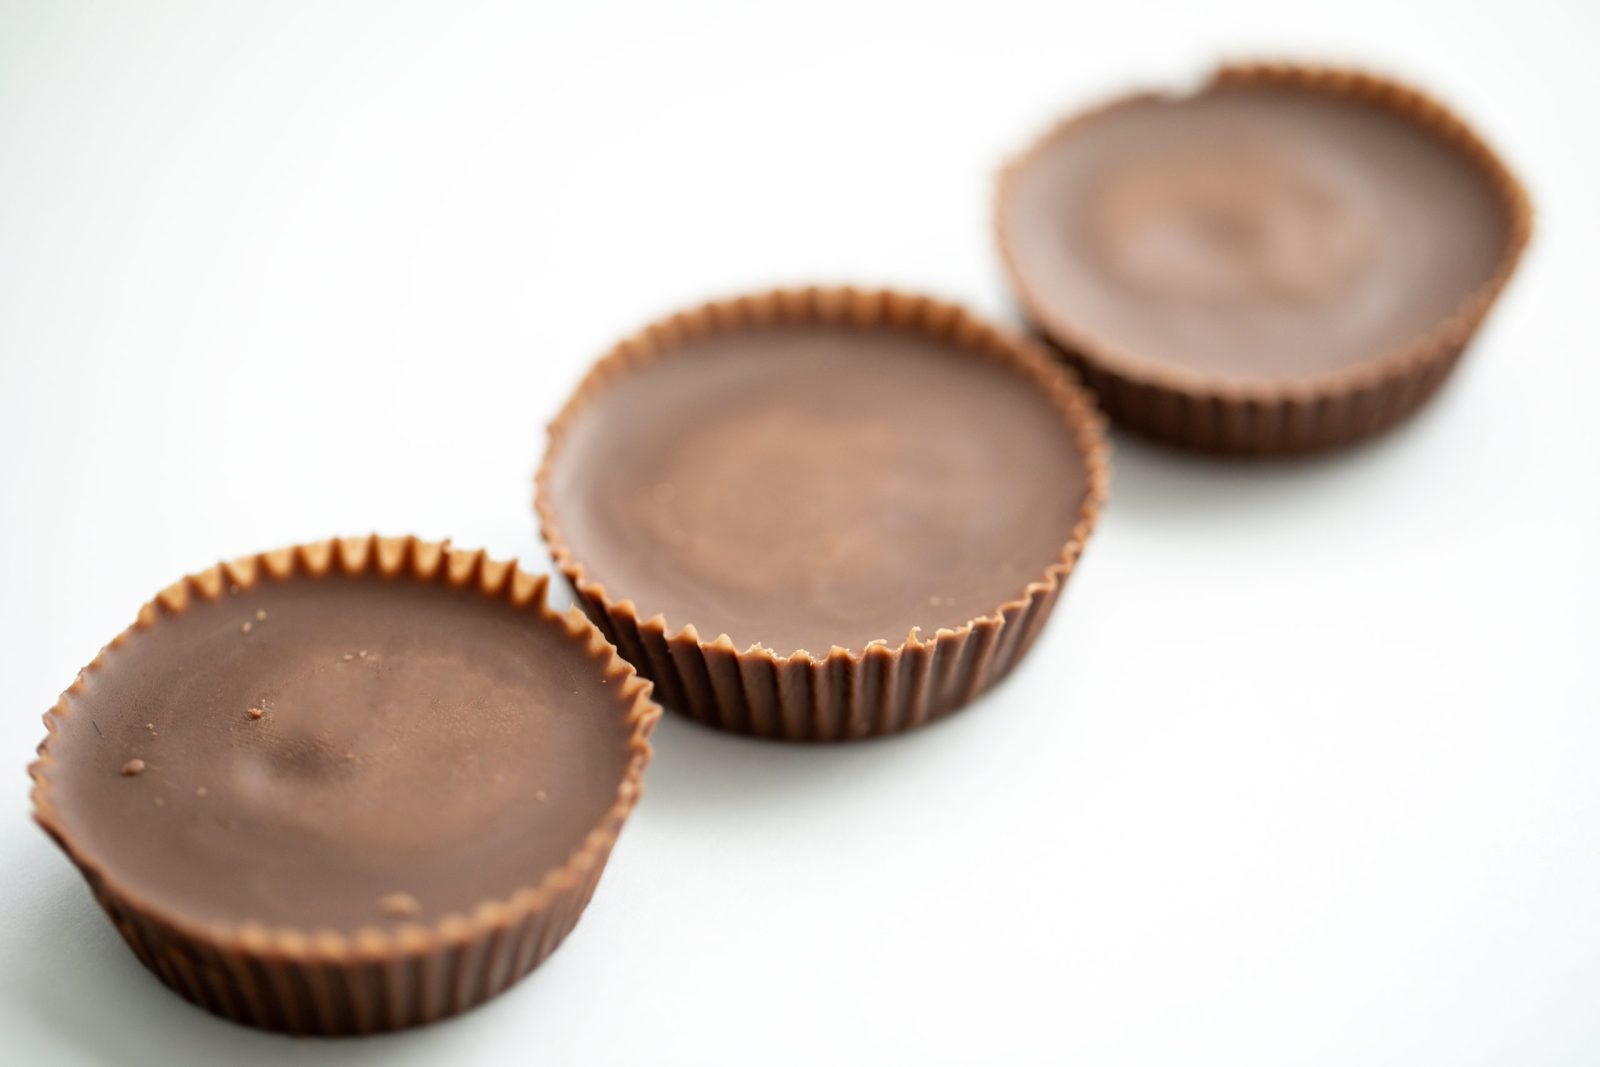 shutterstock_1194637558-scaled-e1677195405257.jpgfit16002C1067ssl1 Reese’s Expected to Make Dairy-Free Debut with Plant-Based Peanut Butter Cups